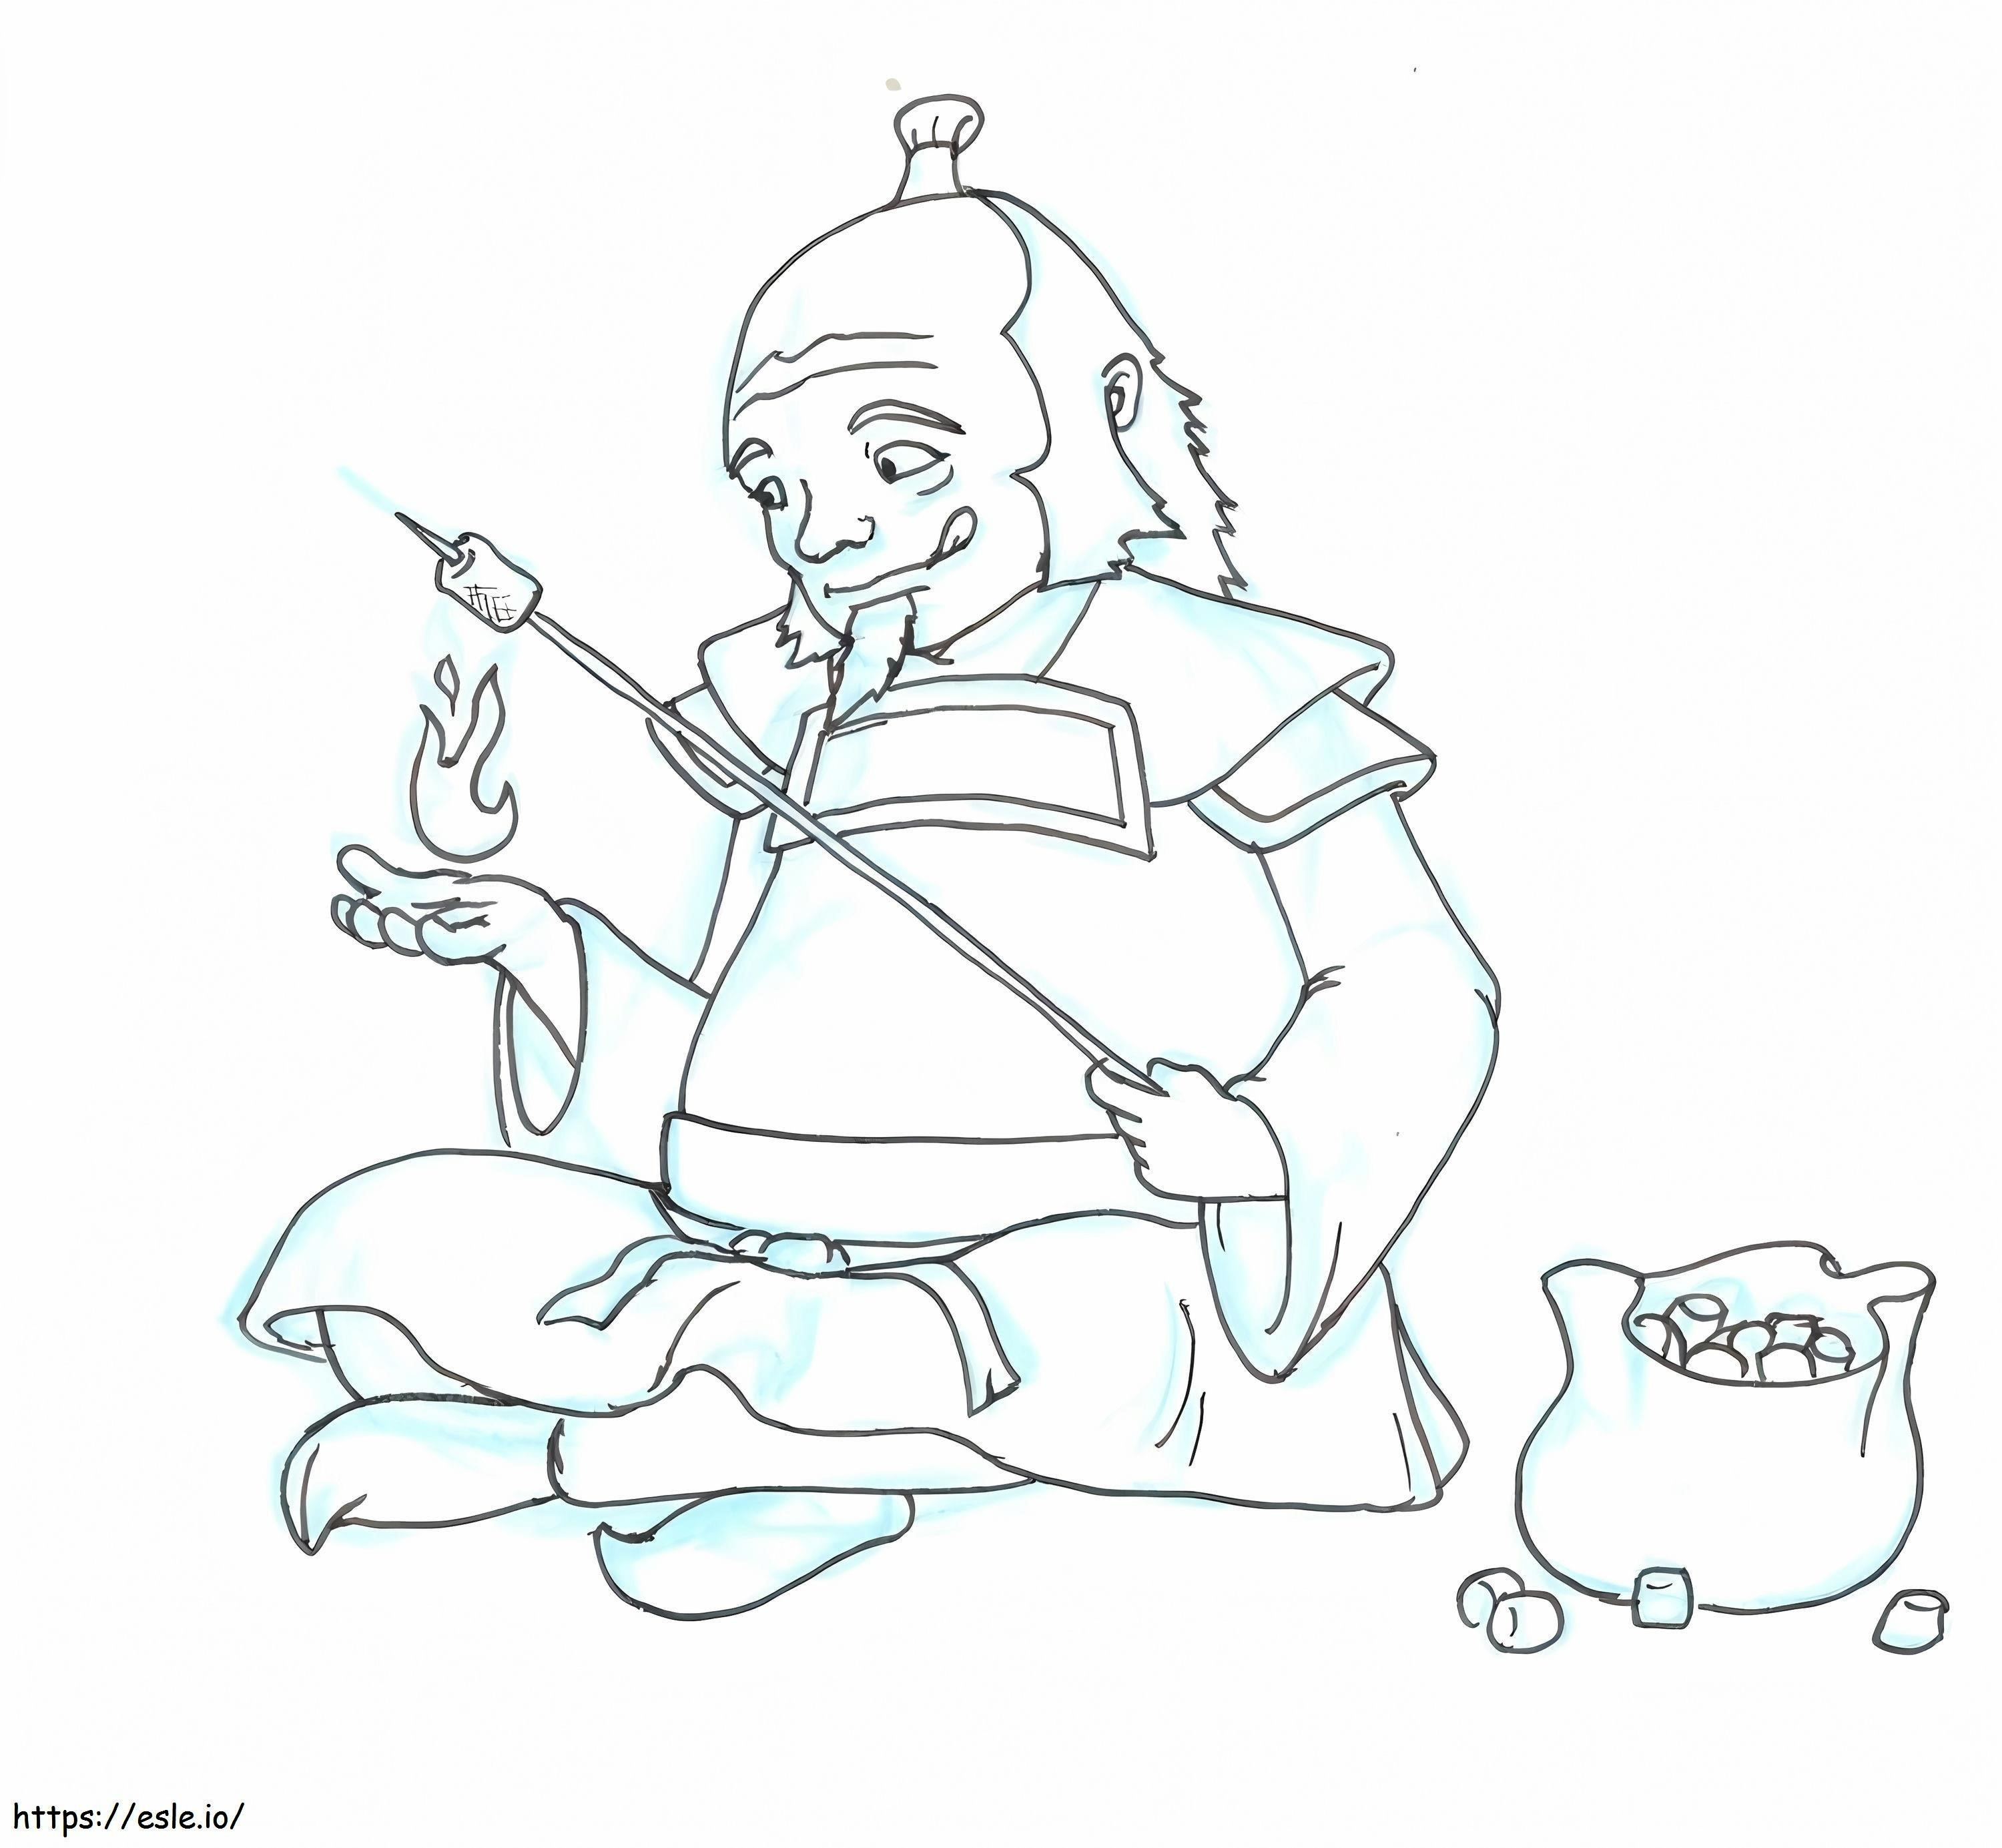 Iroh 3 coloring page